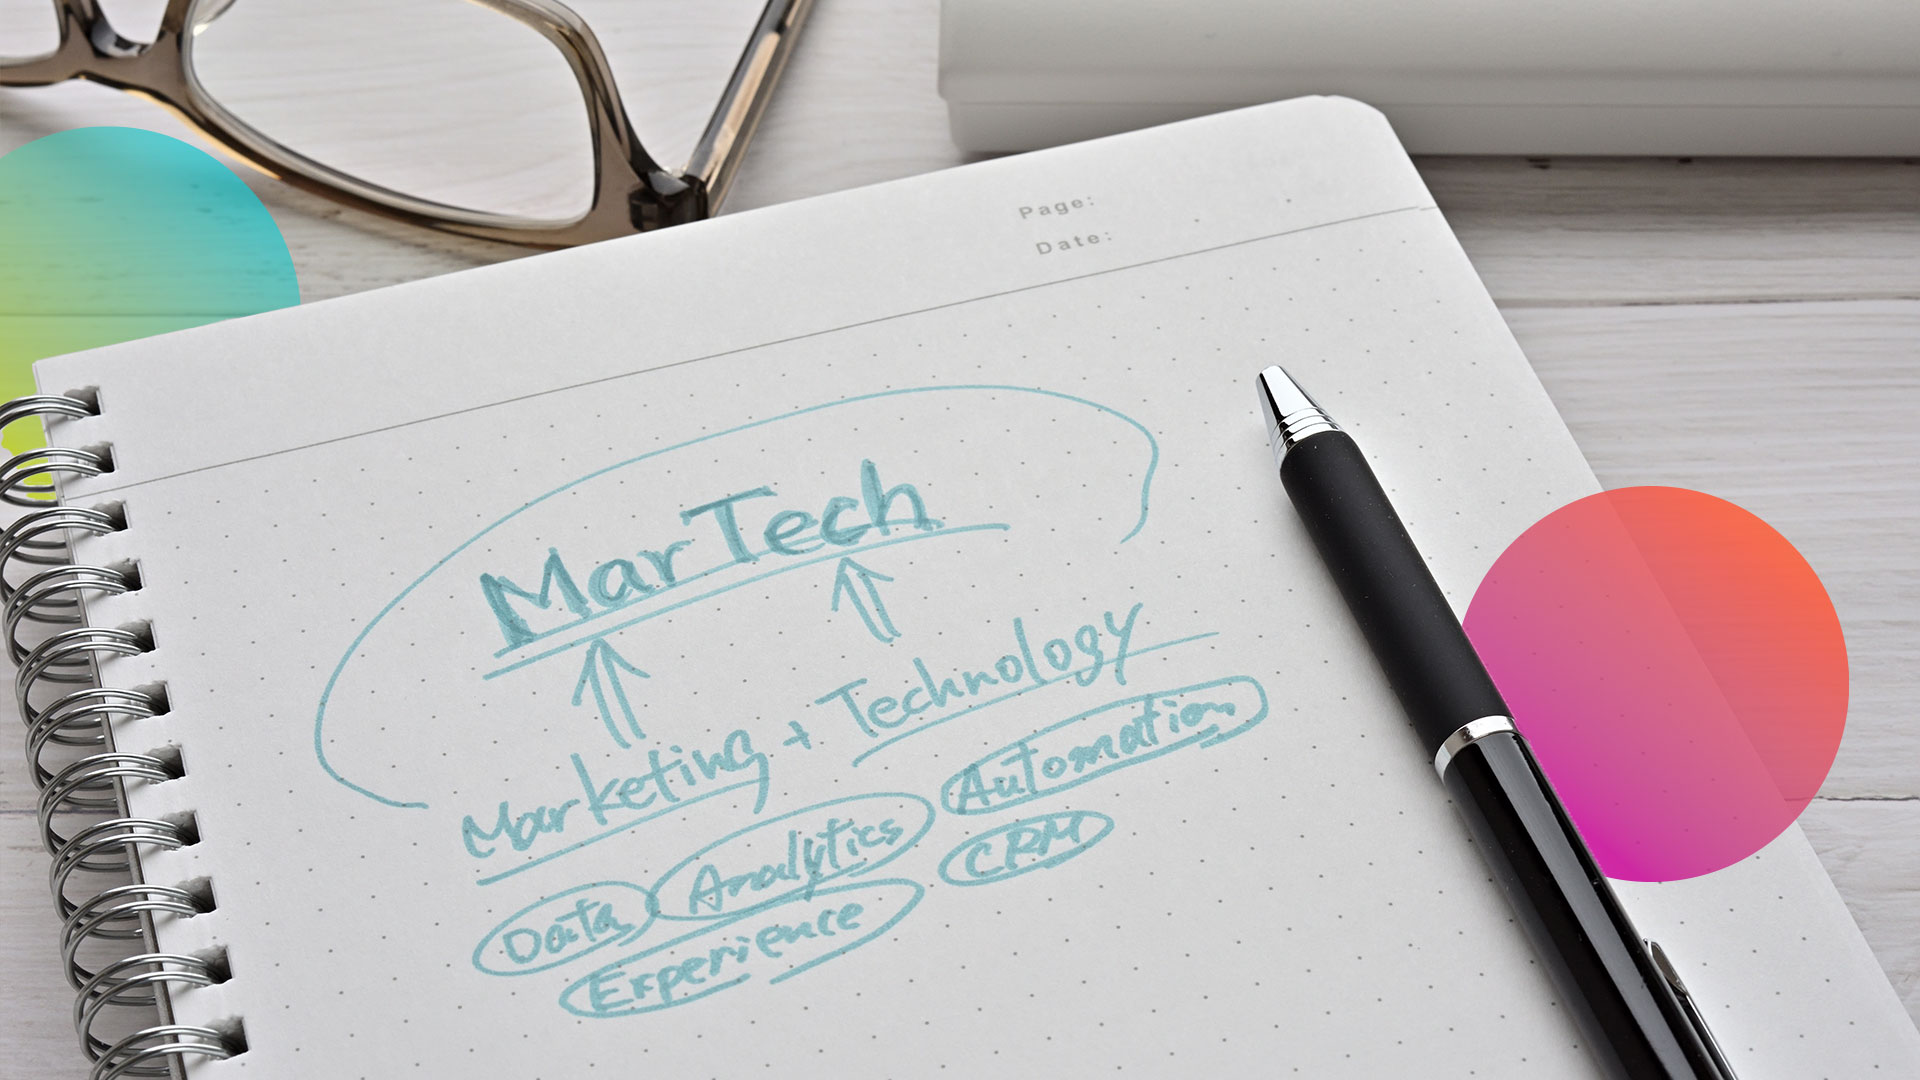 Why invest in a martech stack?